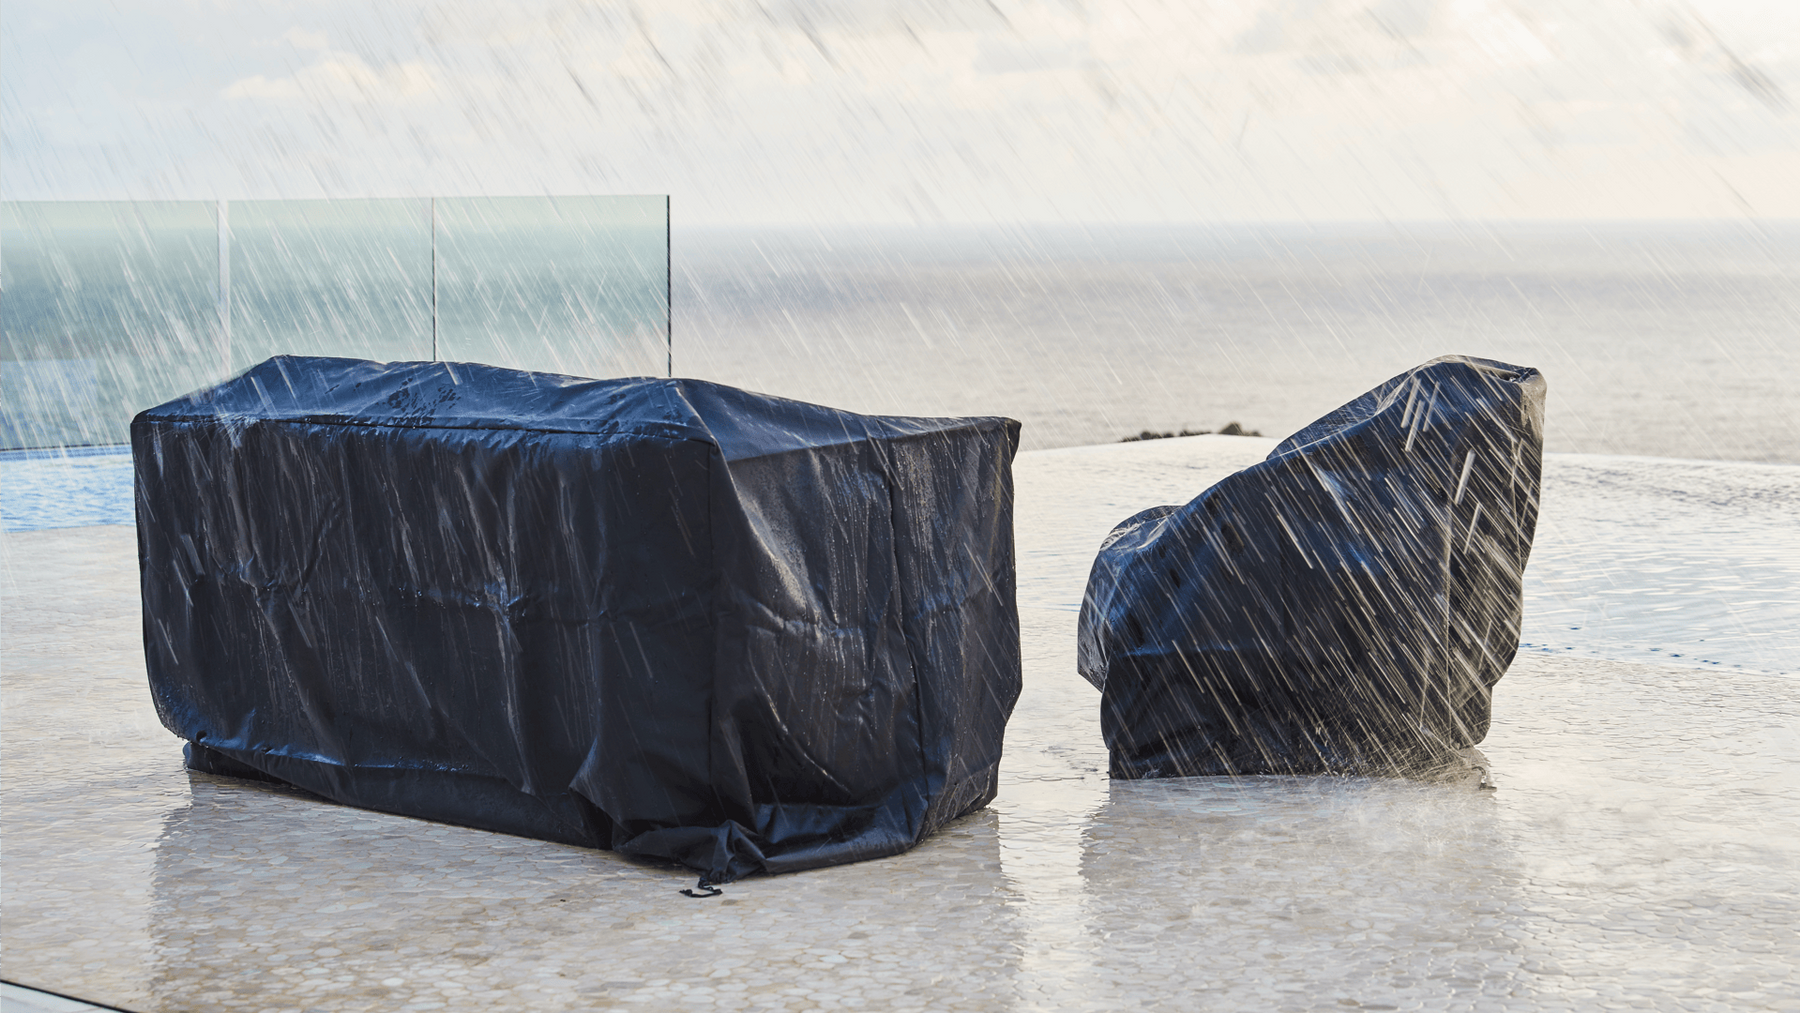 Outdoor furniture is protected from pouring rain with professionally fitted black covers.